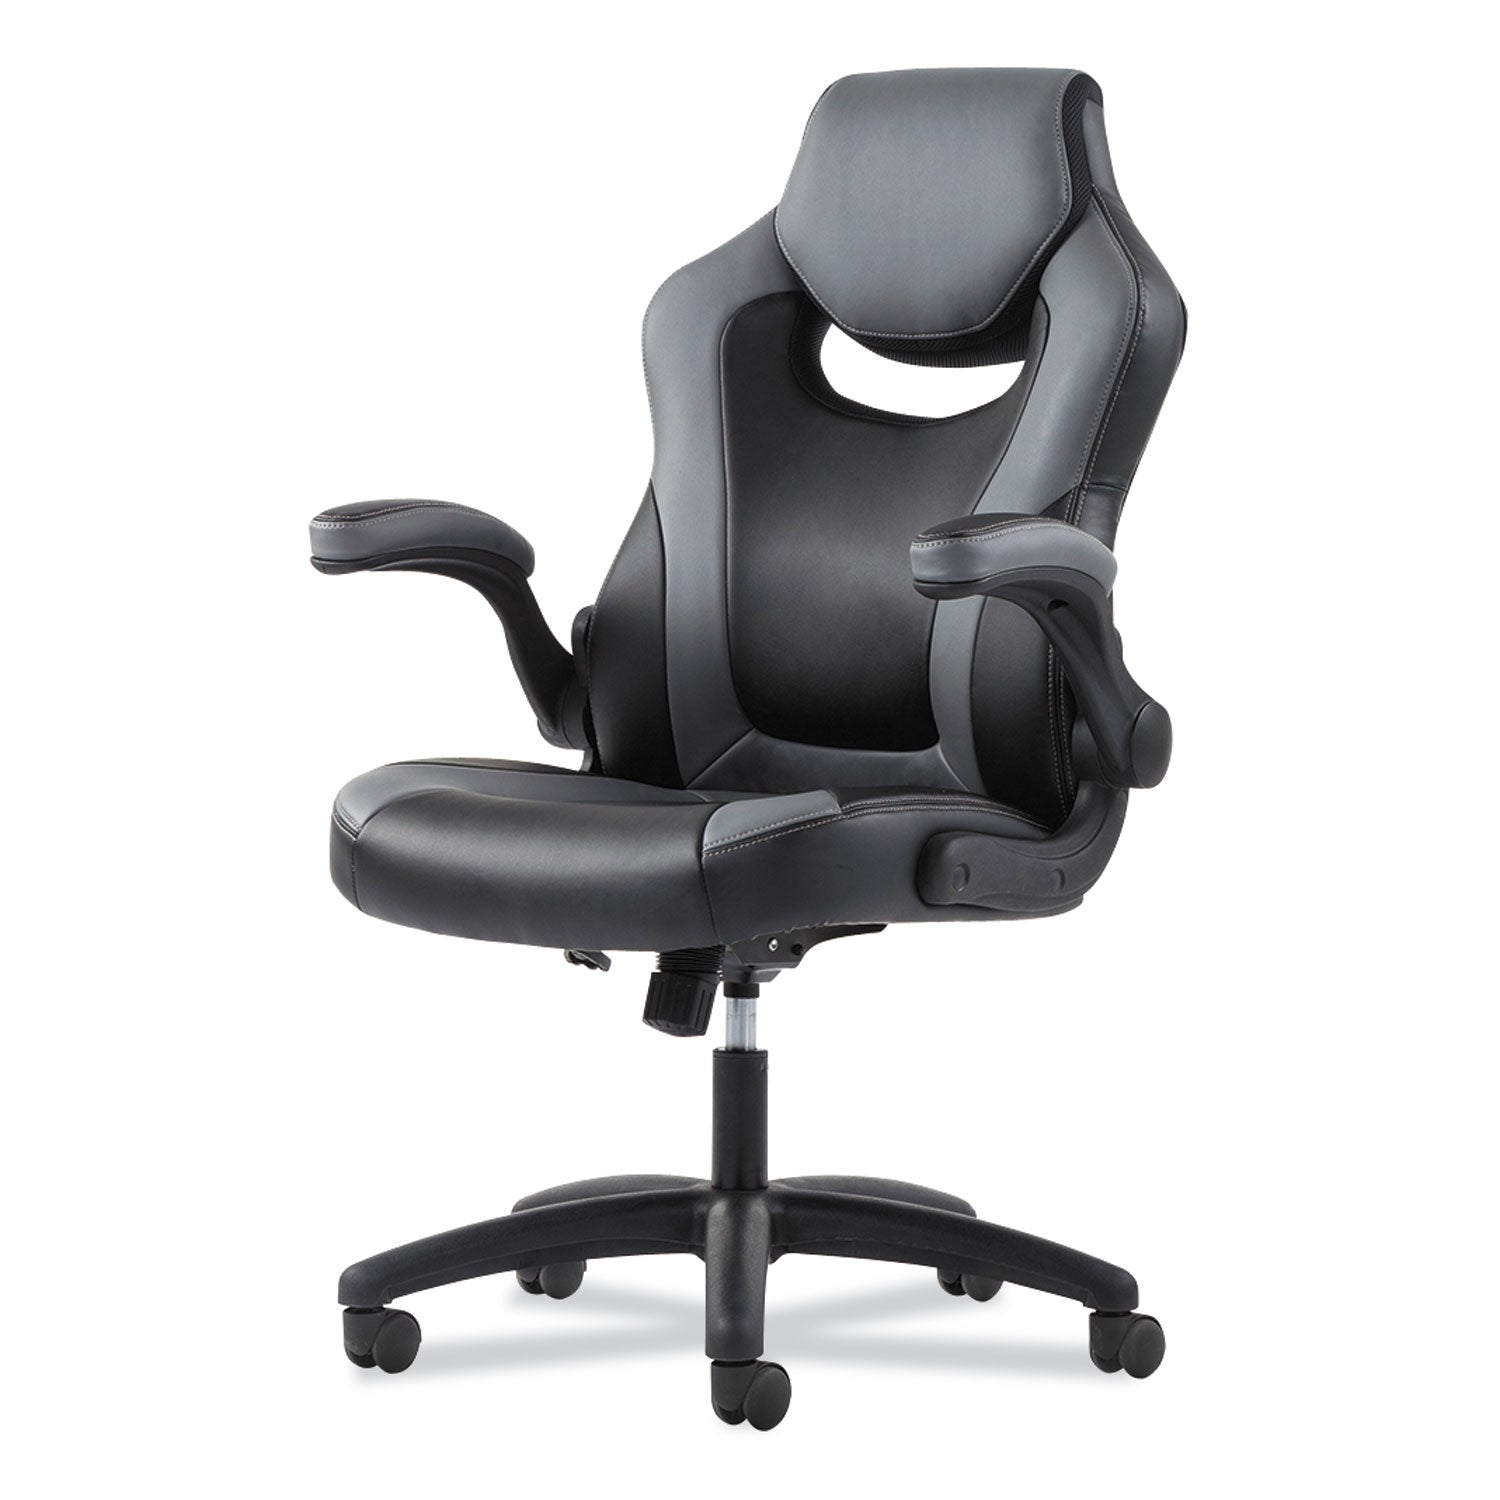 9-one-one-high-back-racing-style-chair-with-flip-up-arms-supports-up-to-225-lb-black-seat-gray-back-black-base_bsxvst911 - 6